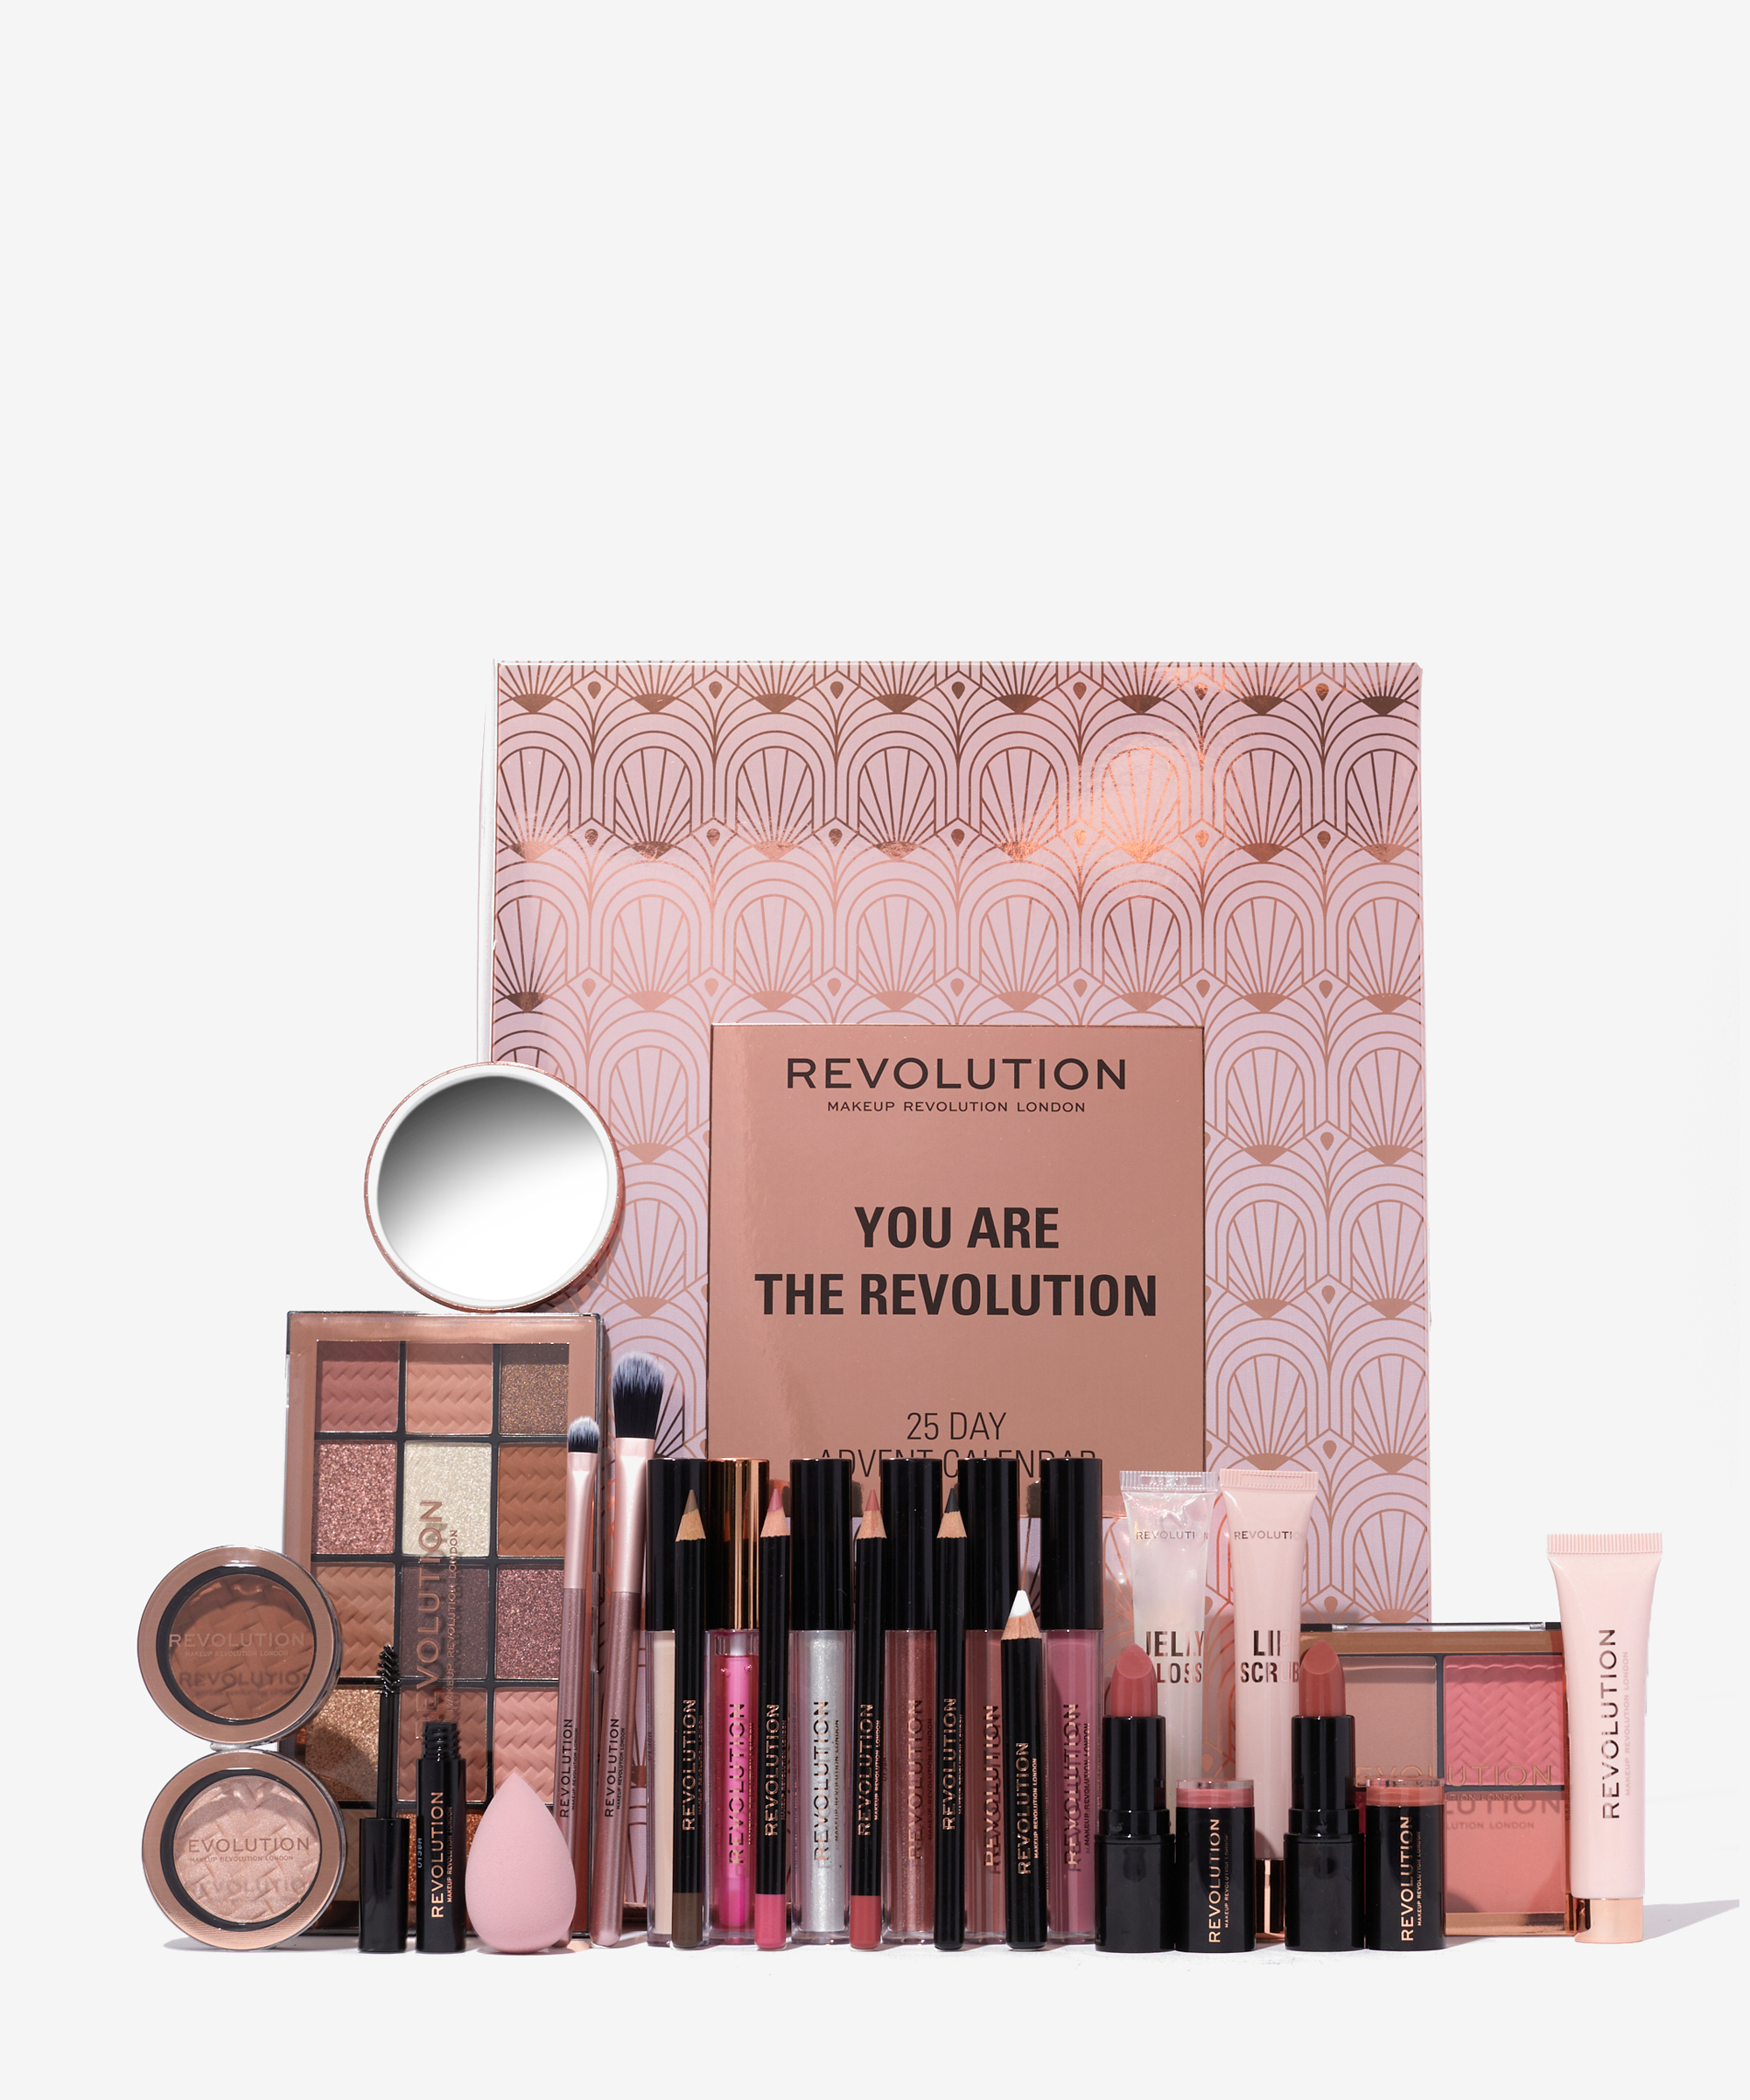 Makeup Revolution You Are The Revolution 25 Day Advent Calendar at